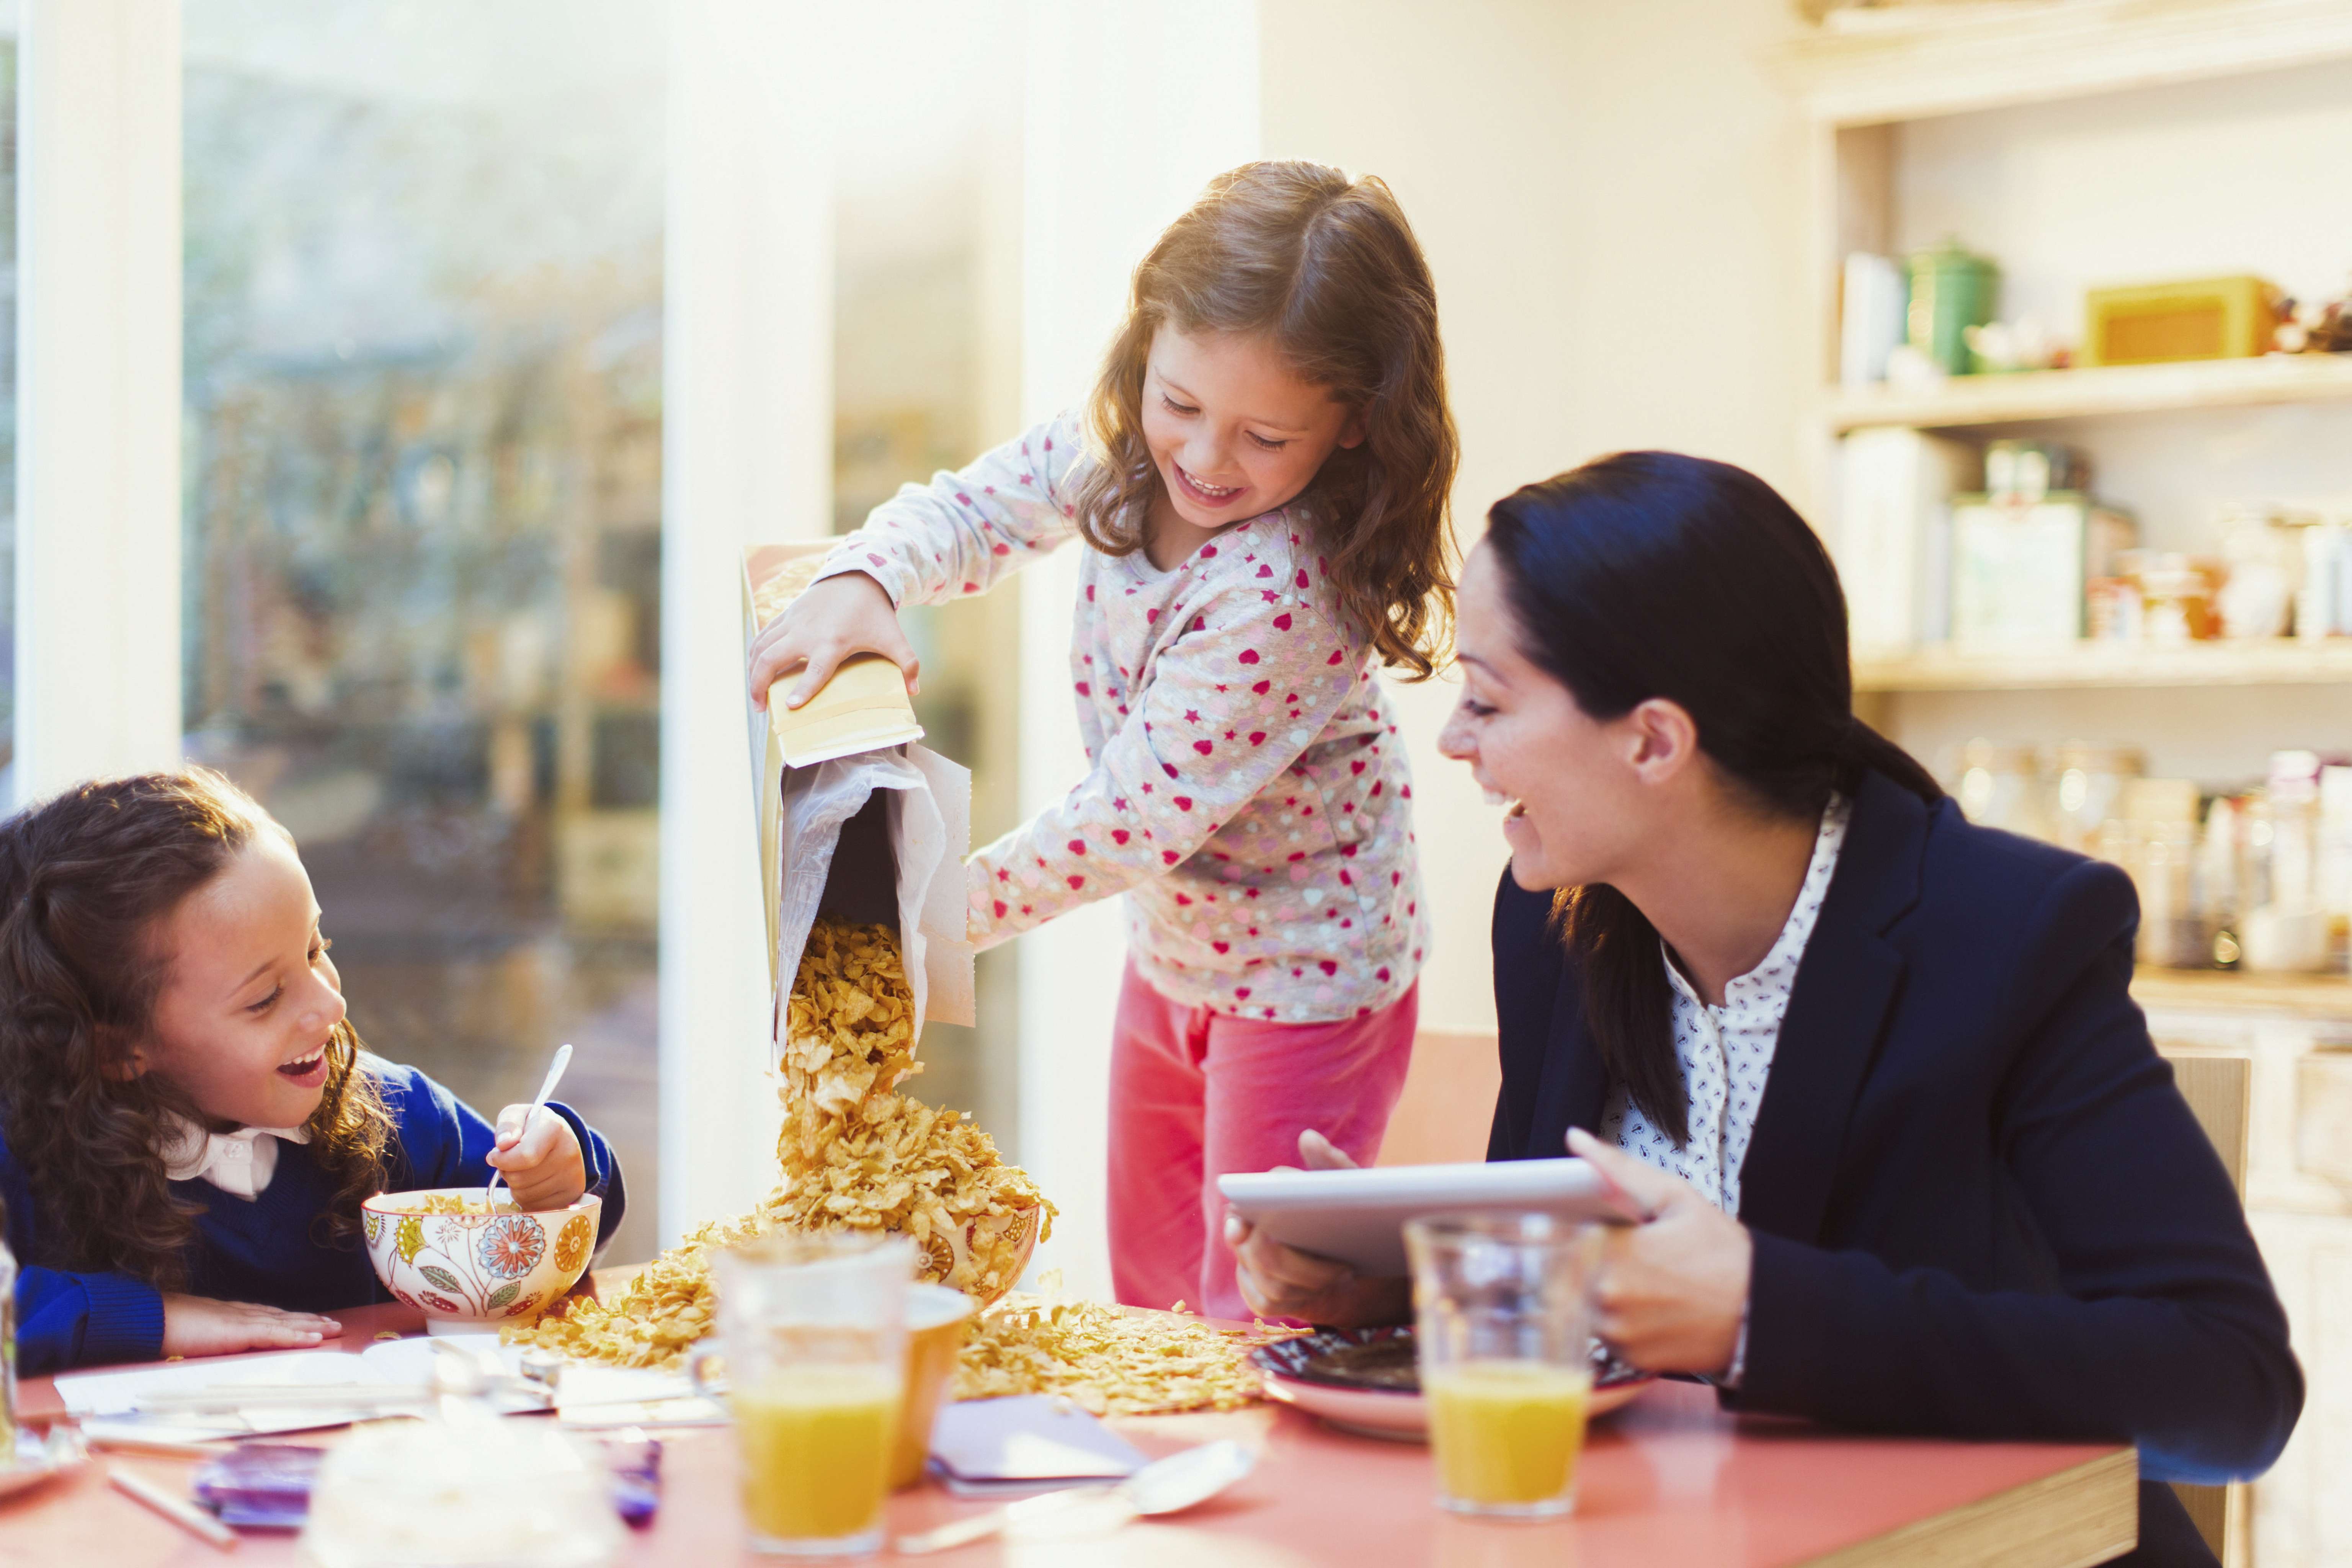 Globally, cereal is no longer a cornerstone of breakfasts. Photo: Alamy Stock Photo